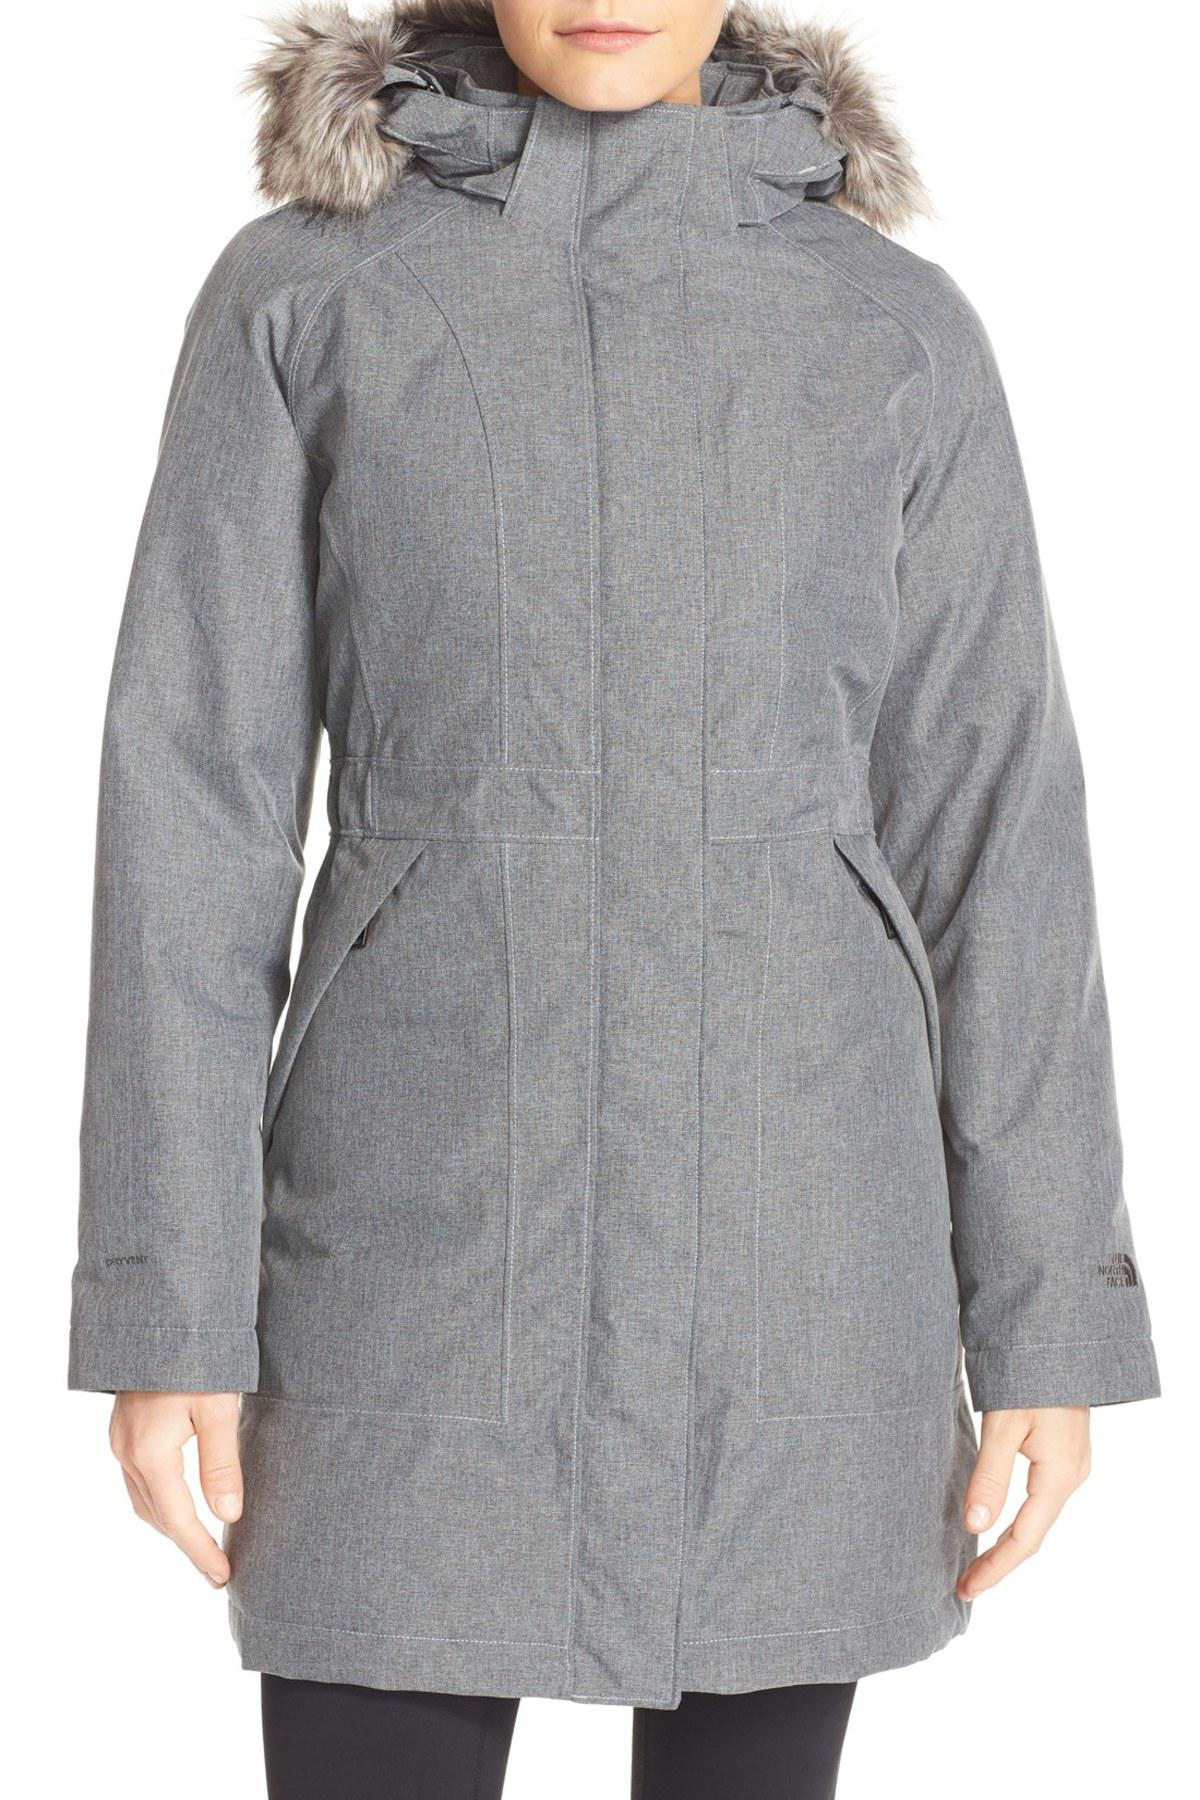 The North Face Arctic Down Parka With Removable Faux Fur Trim Hood in Gray - Lyst